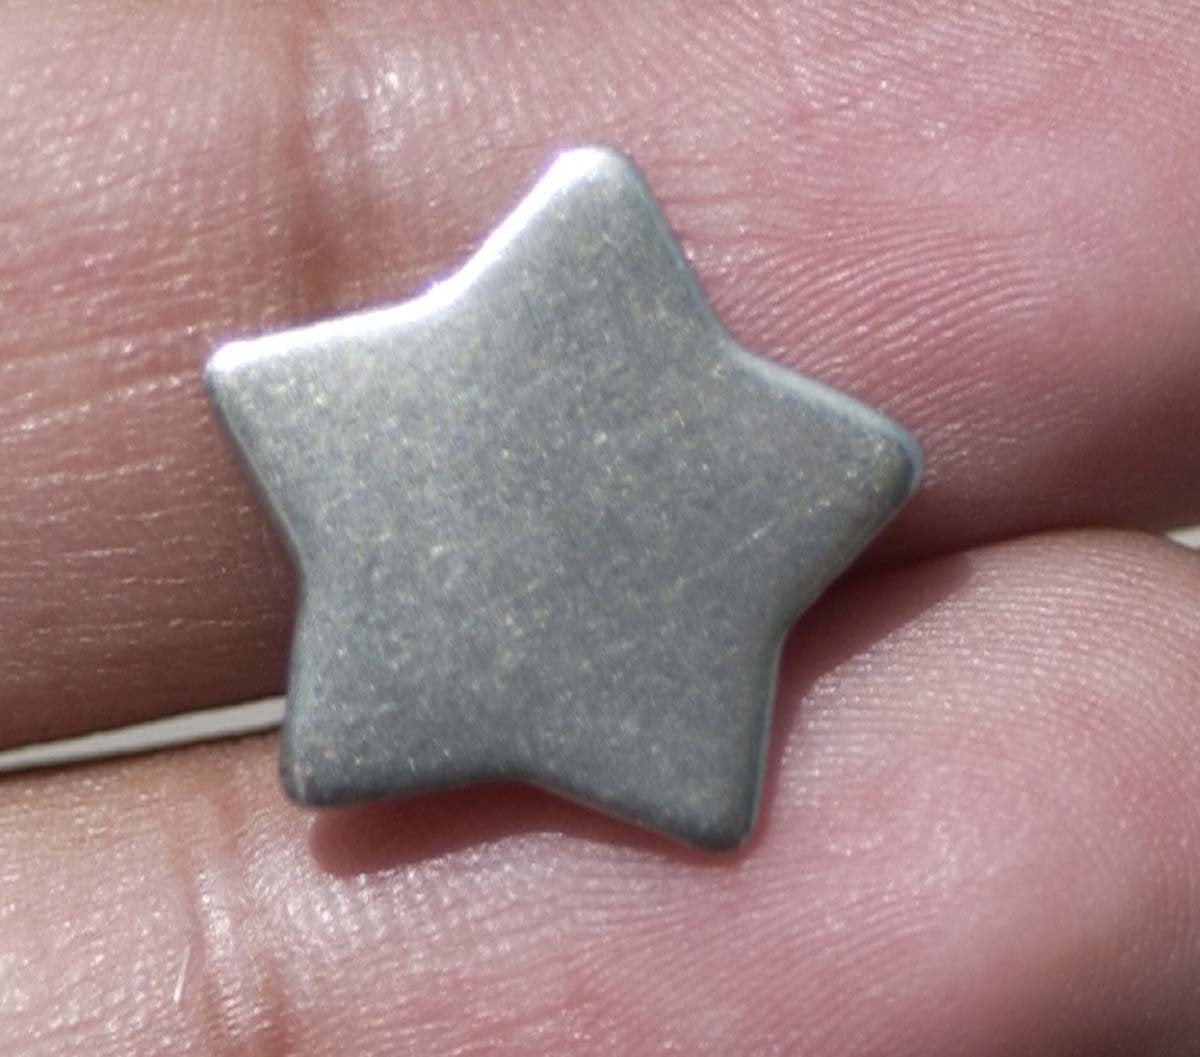 Nickel Silver Chubby Star 14.5mm Blanks Cutout for Metalworking Stamping Texturing Blank